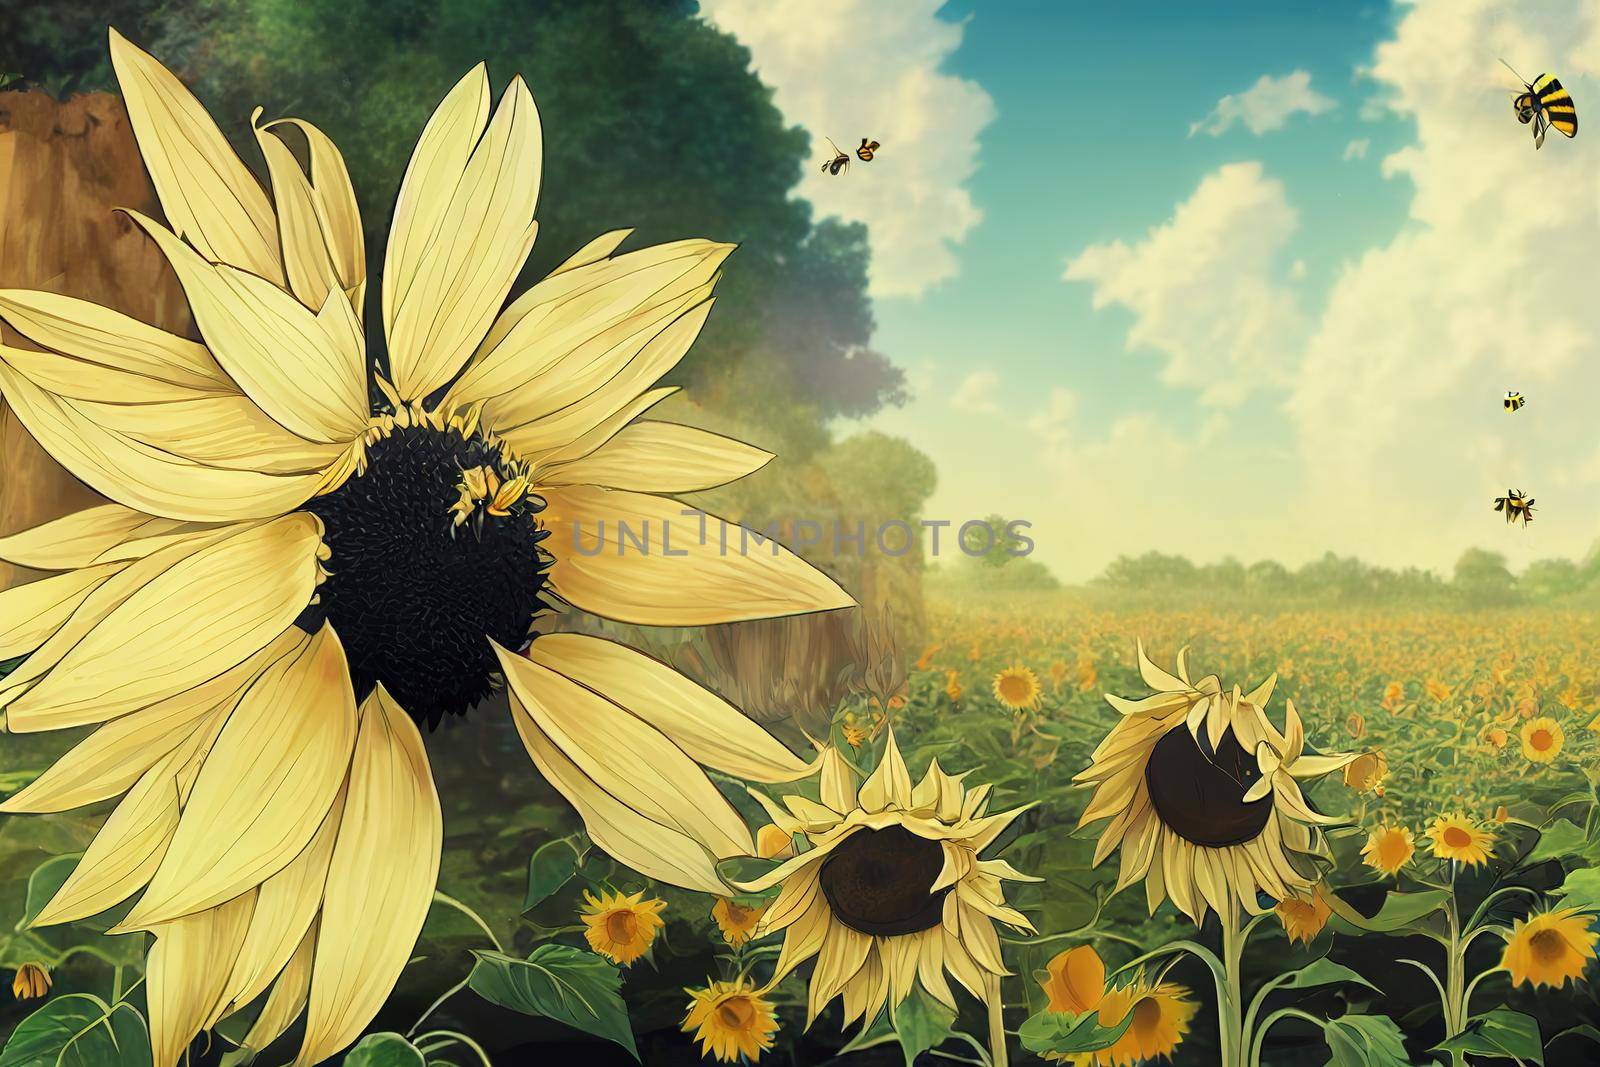 anime style, Bee over the sunflower flower 2d by 2ragon